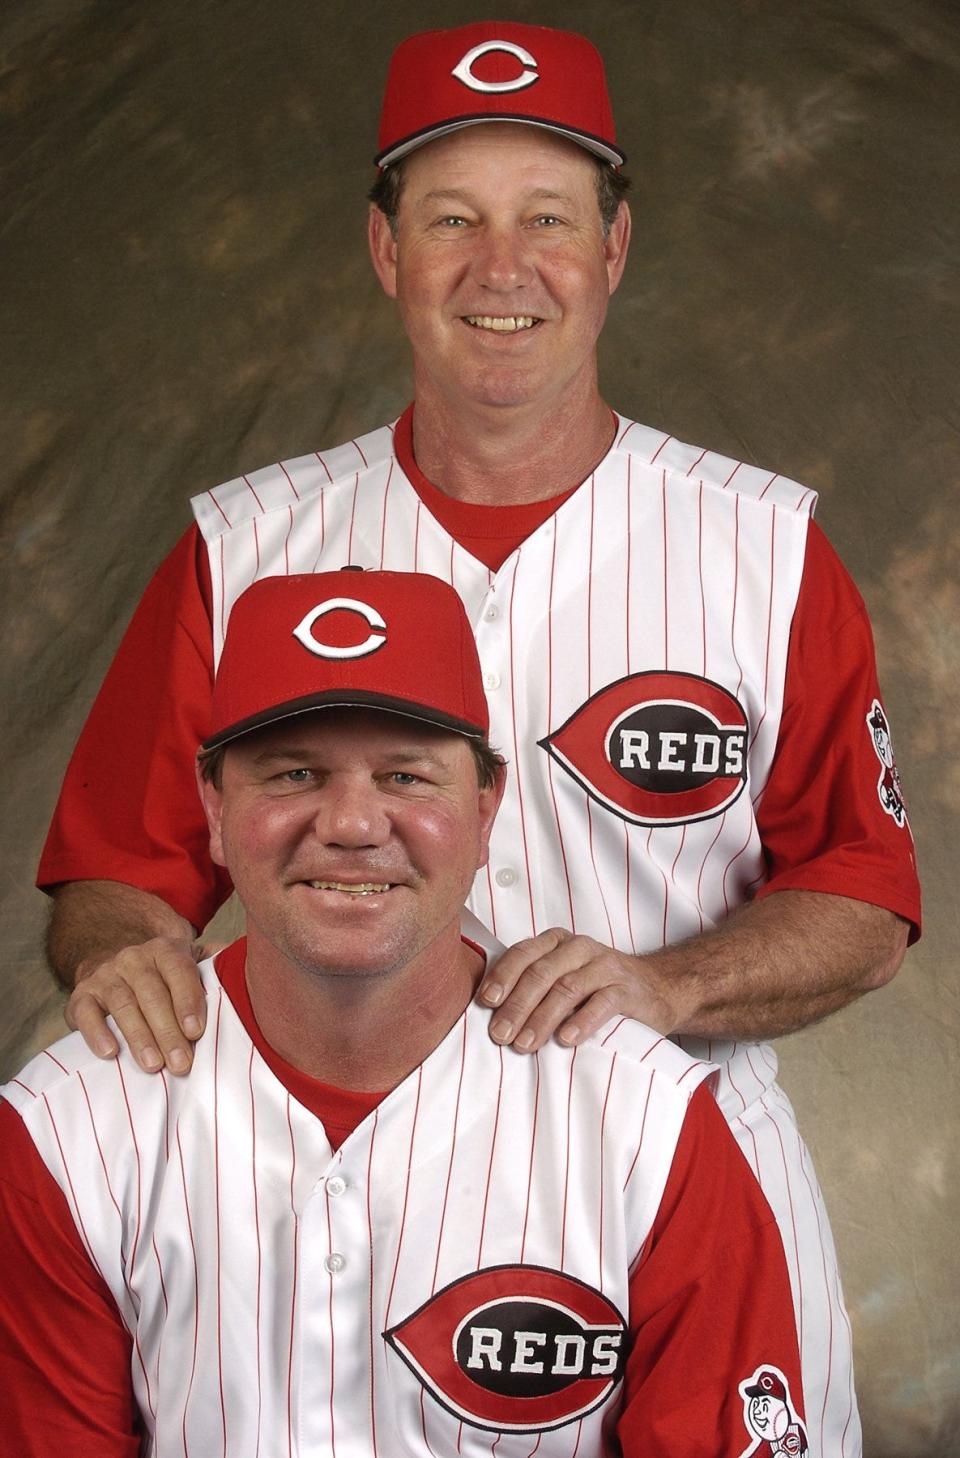 Don Gullett (top) was the pitching coach the last time the Reds won a playoff series, in 1995. He held the position until he and manager David Miley (bottom) were fired during the 2005 season.